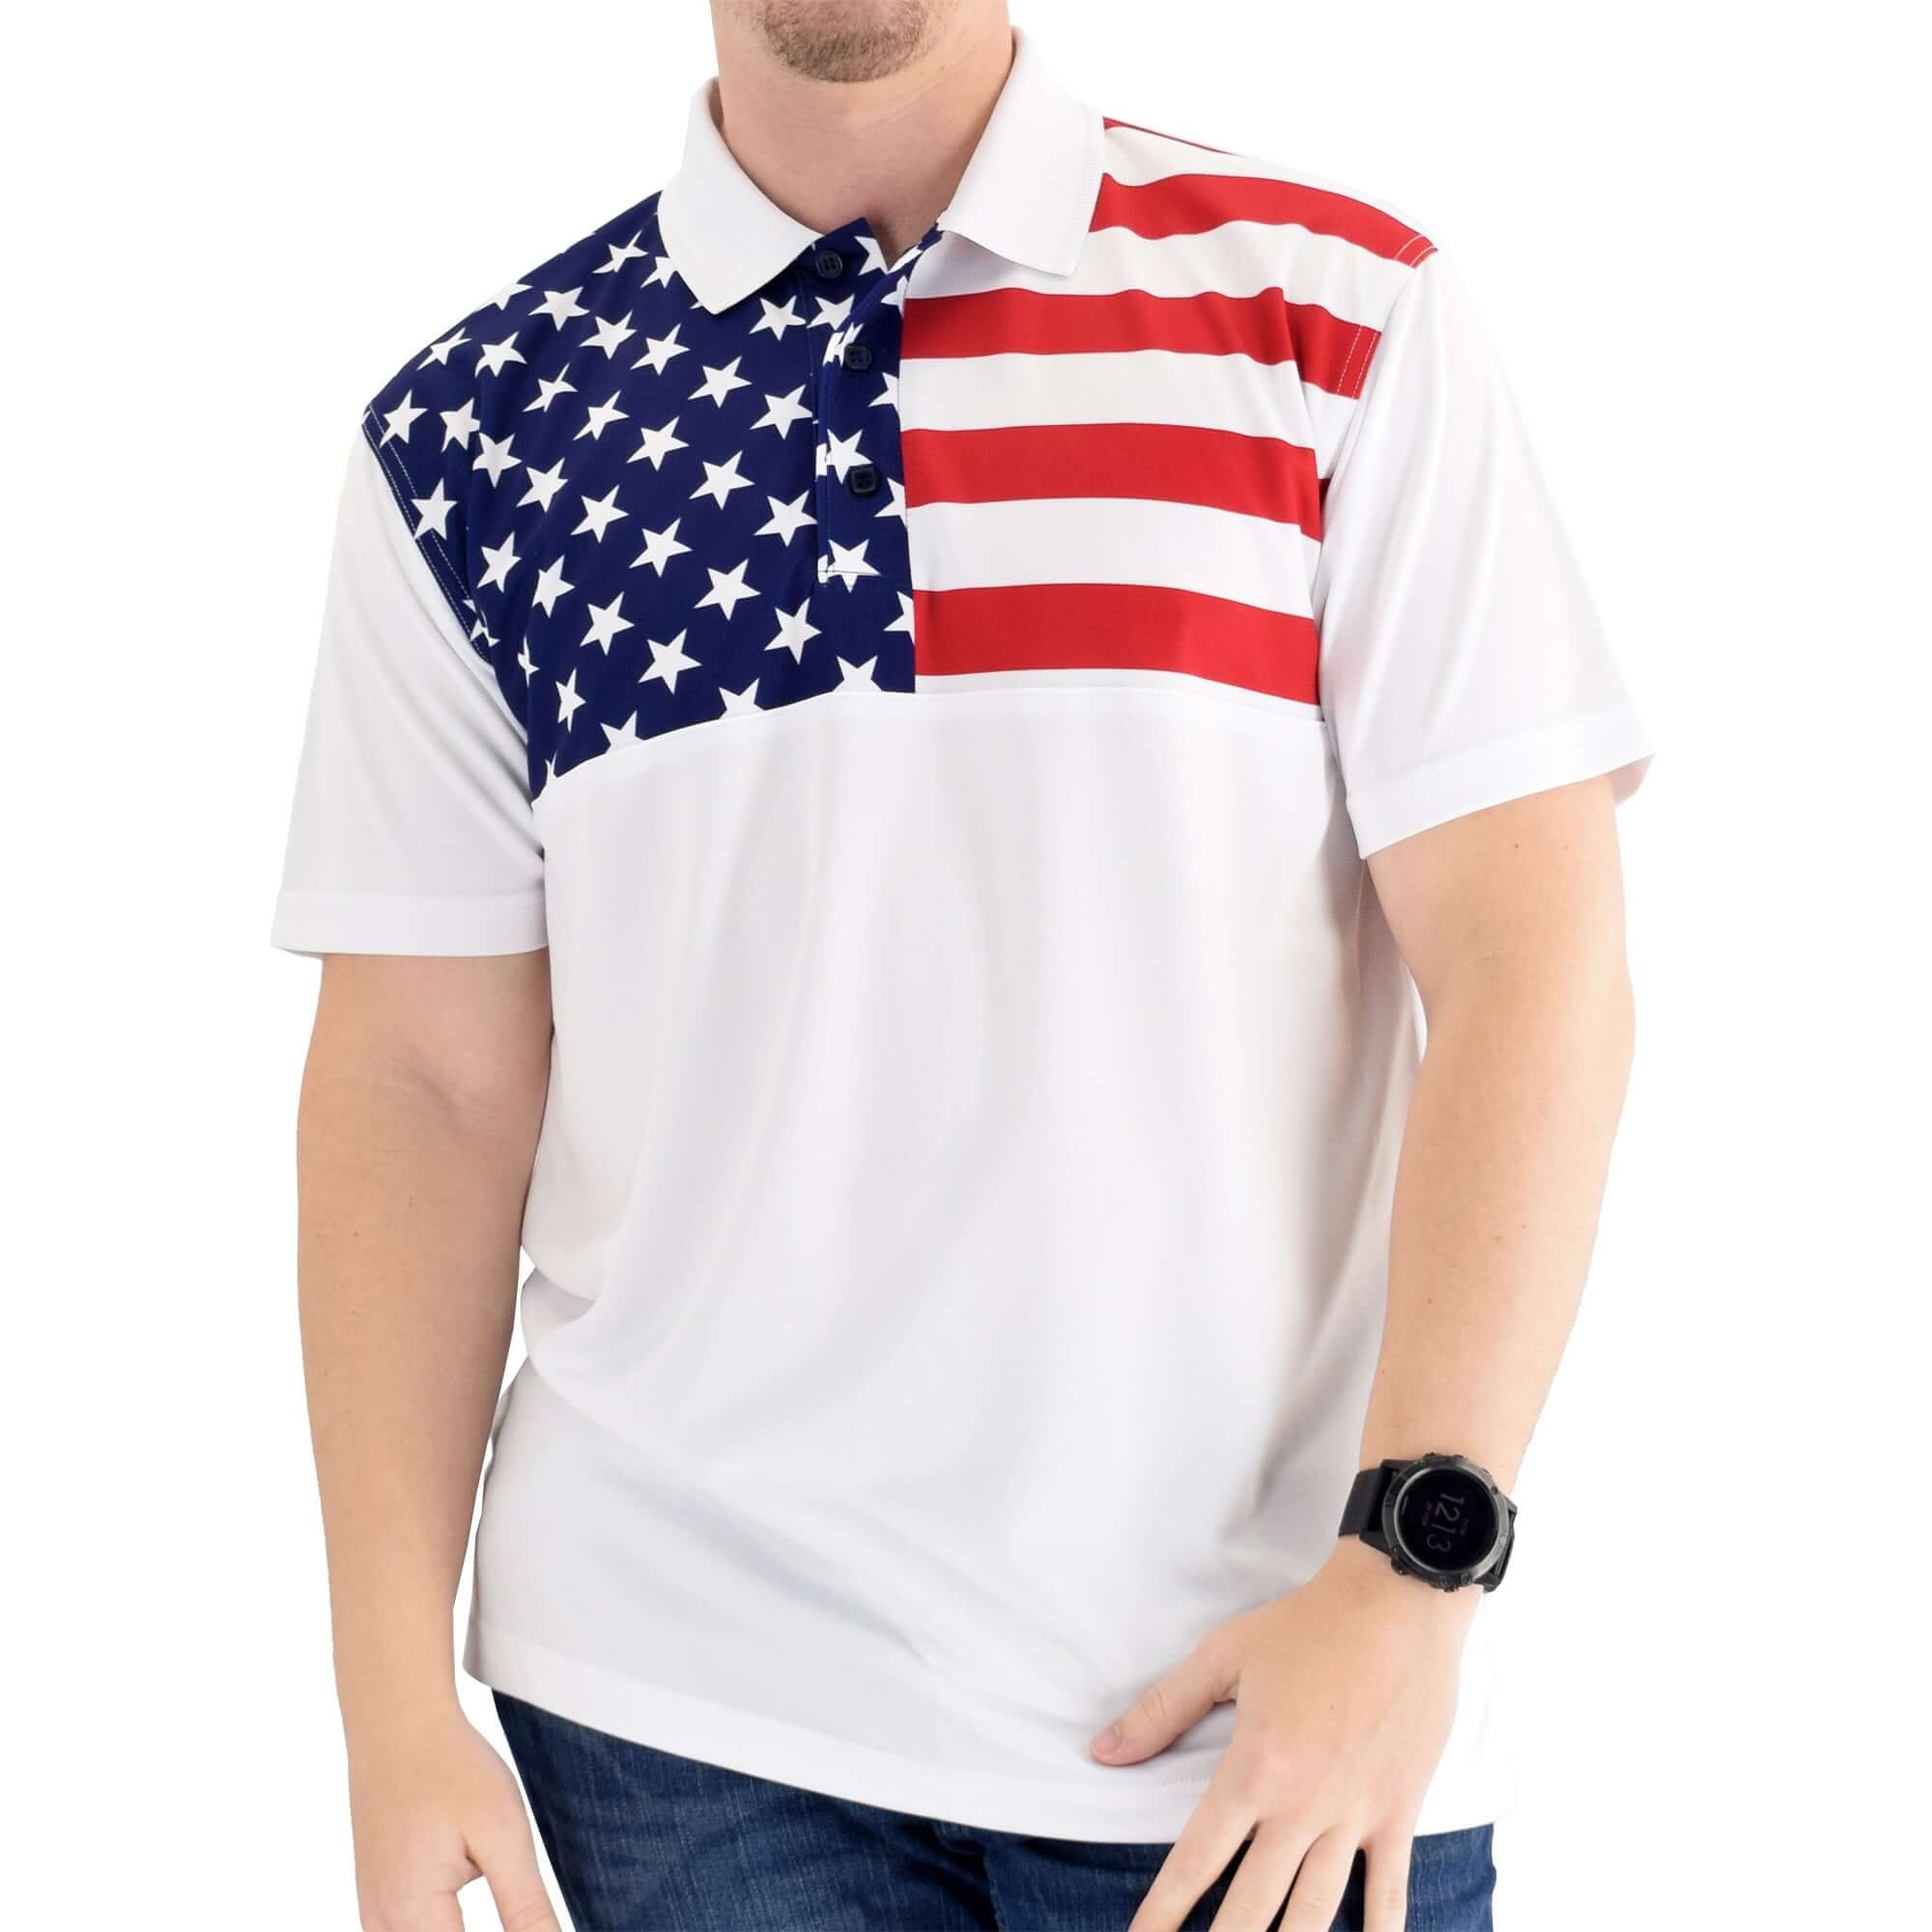 Promotie breed vloot Men's Made in the USA Performance Flag Polo Shirt – The Flag Shirt